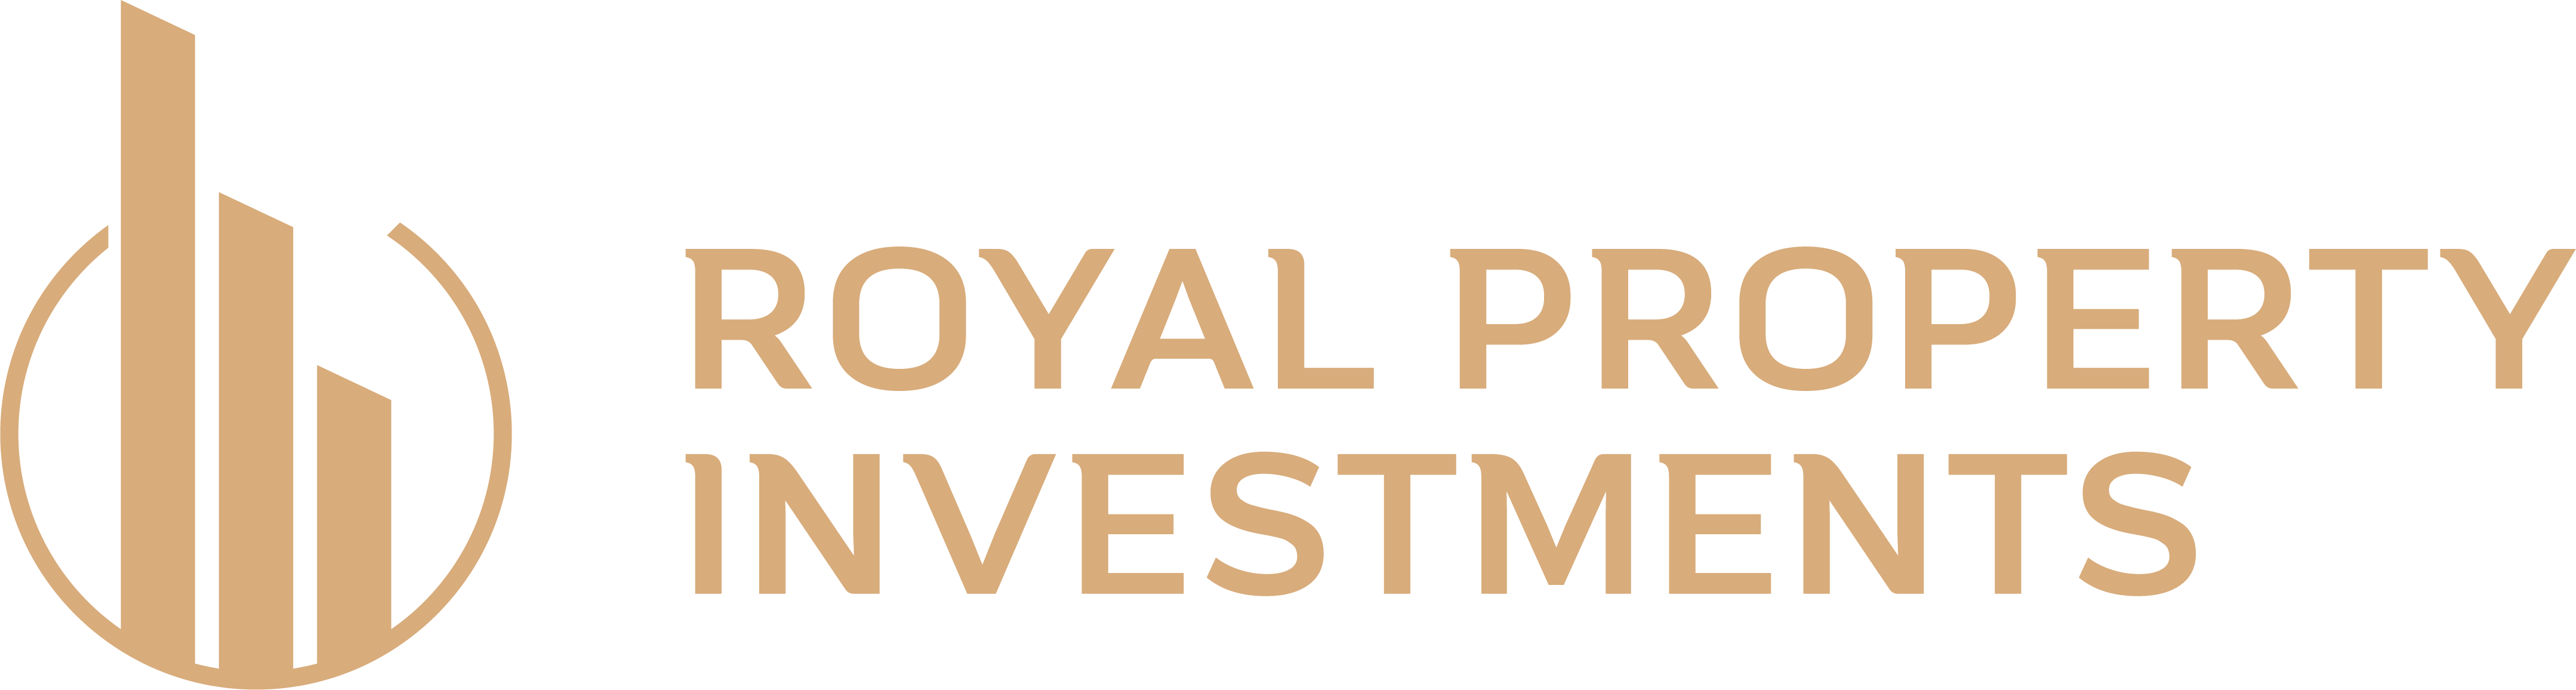 Royal Property Investments